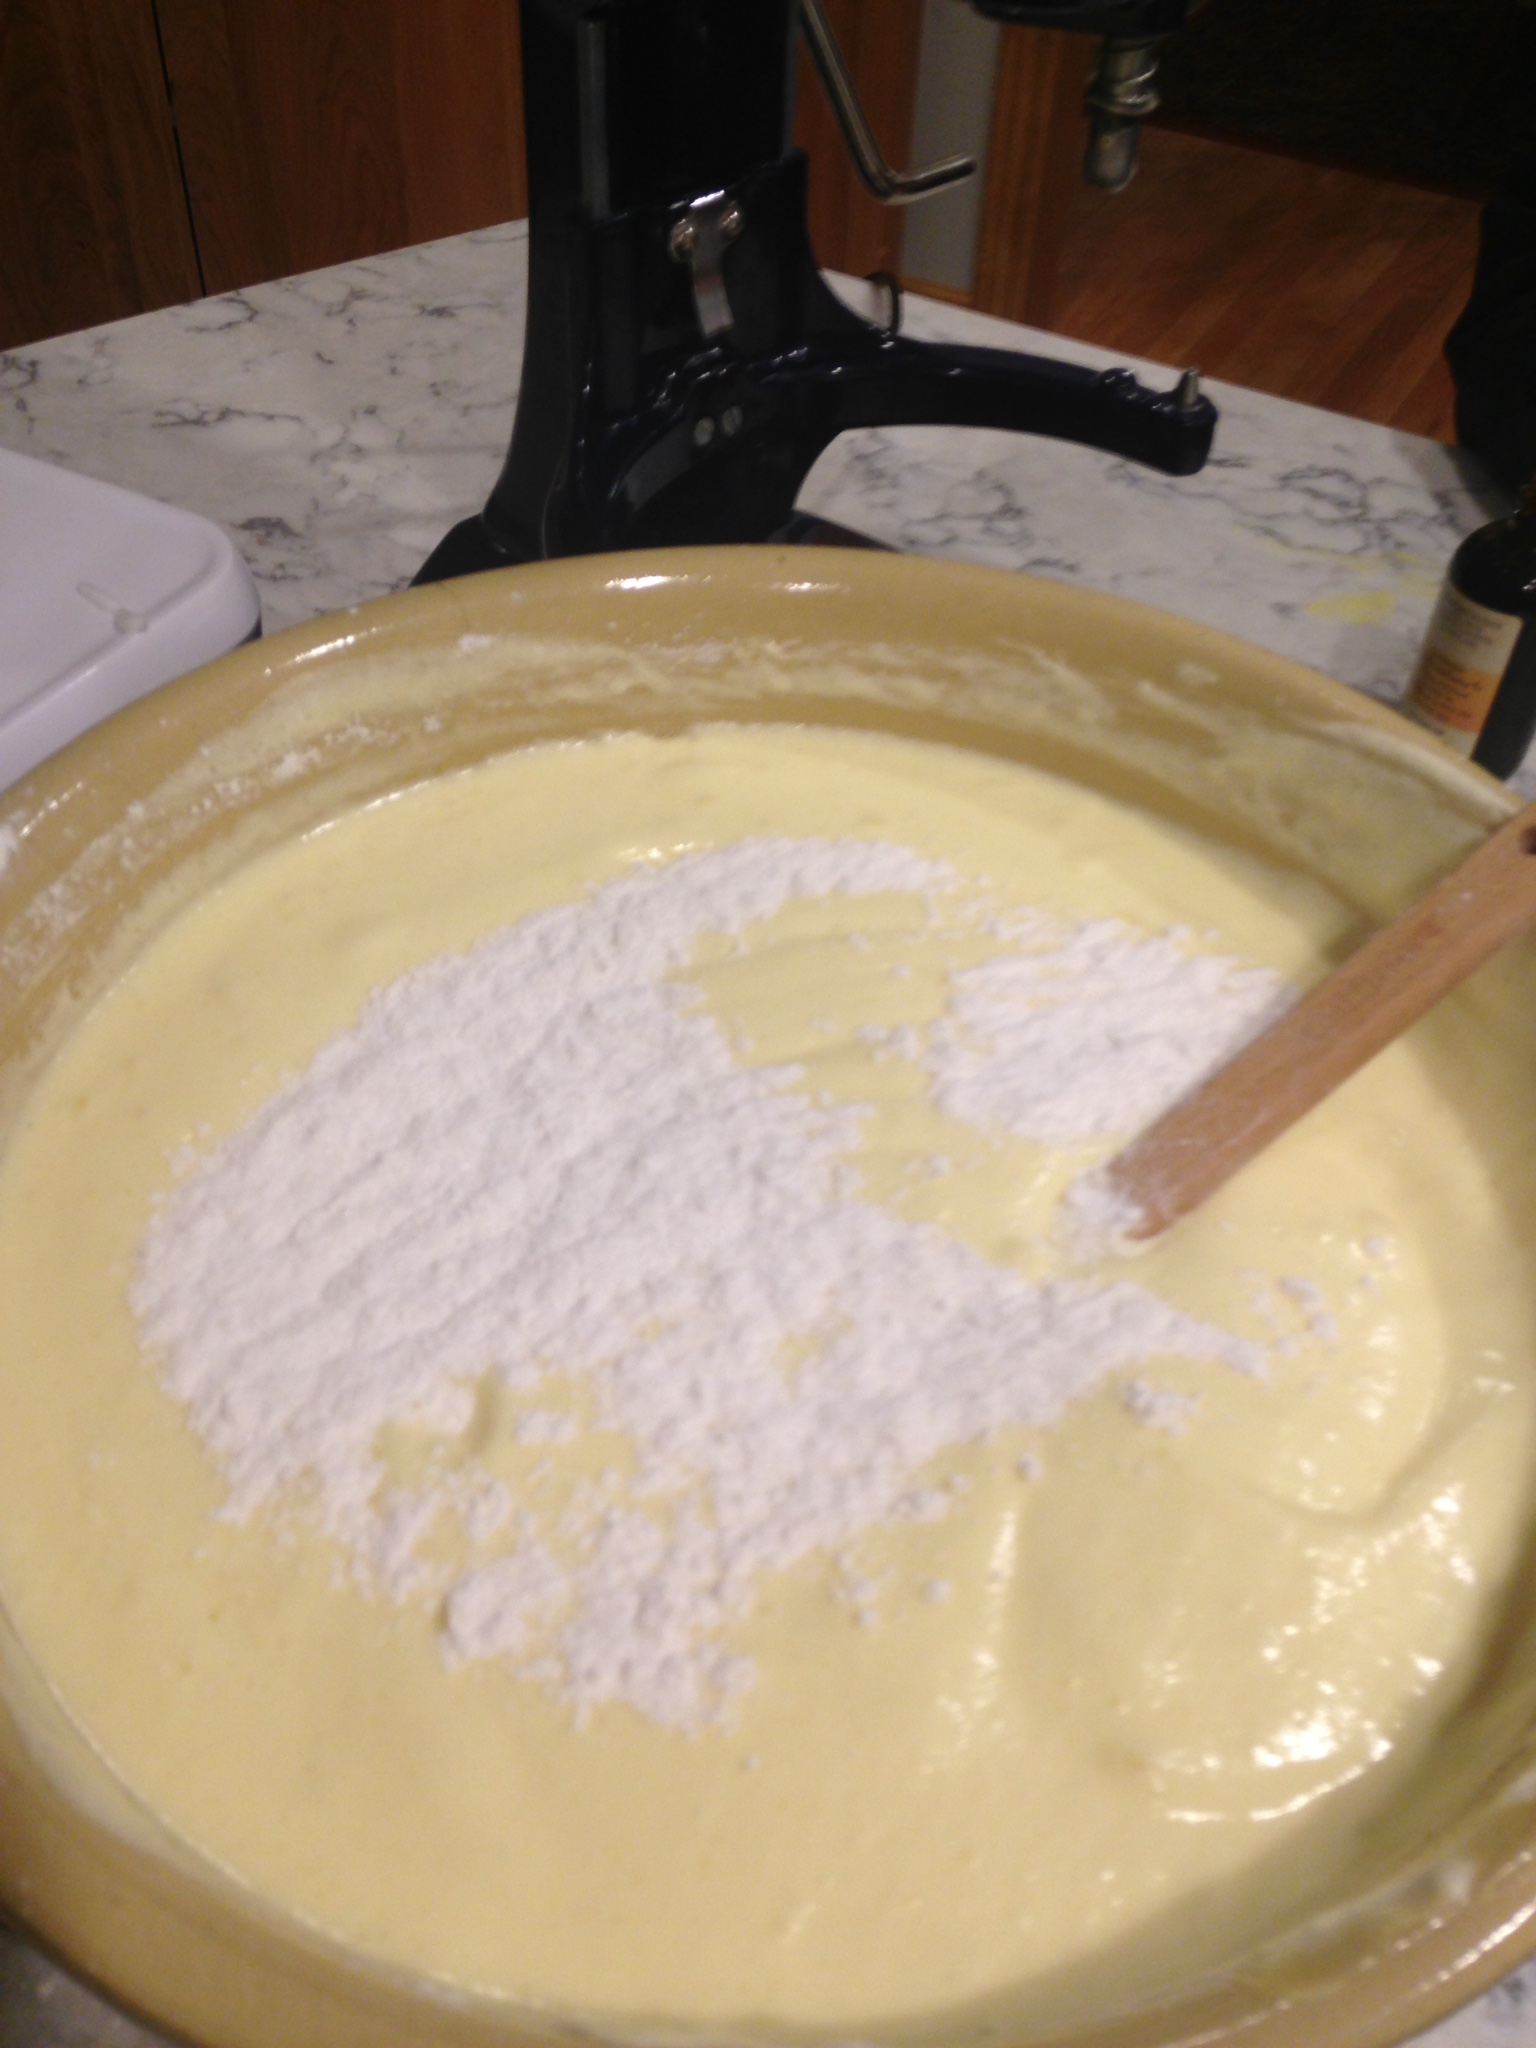 Sprinkle 1/4 cup flour-sugar mixture over top and fold in